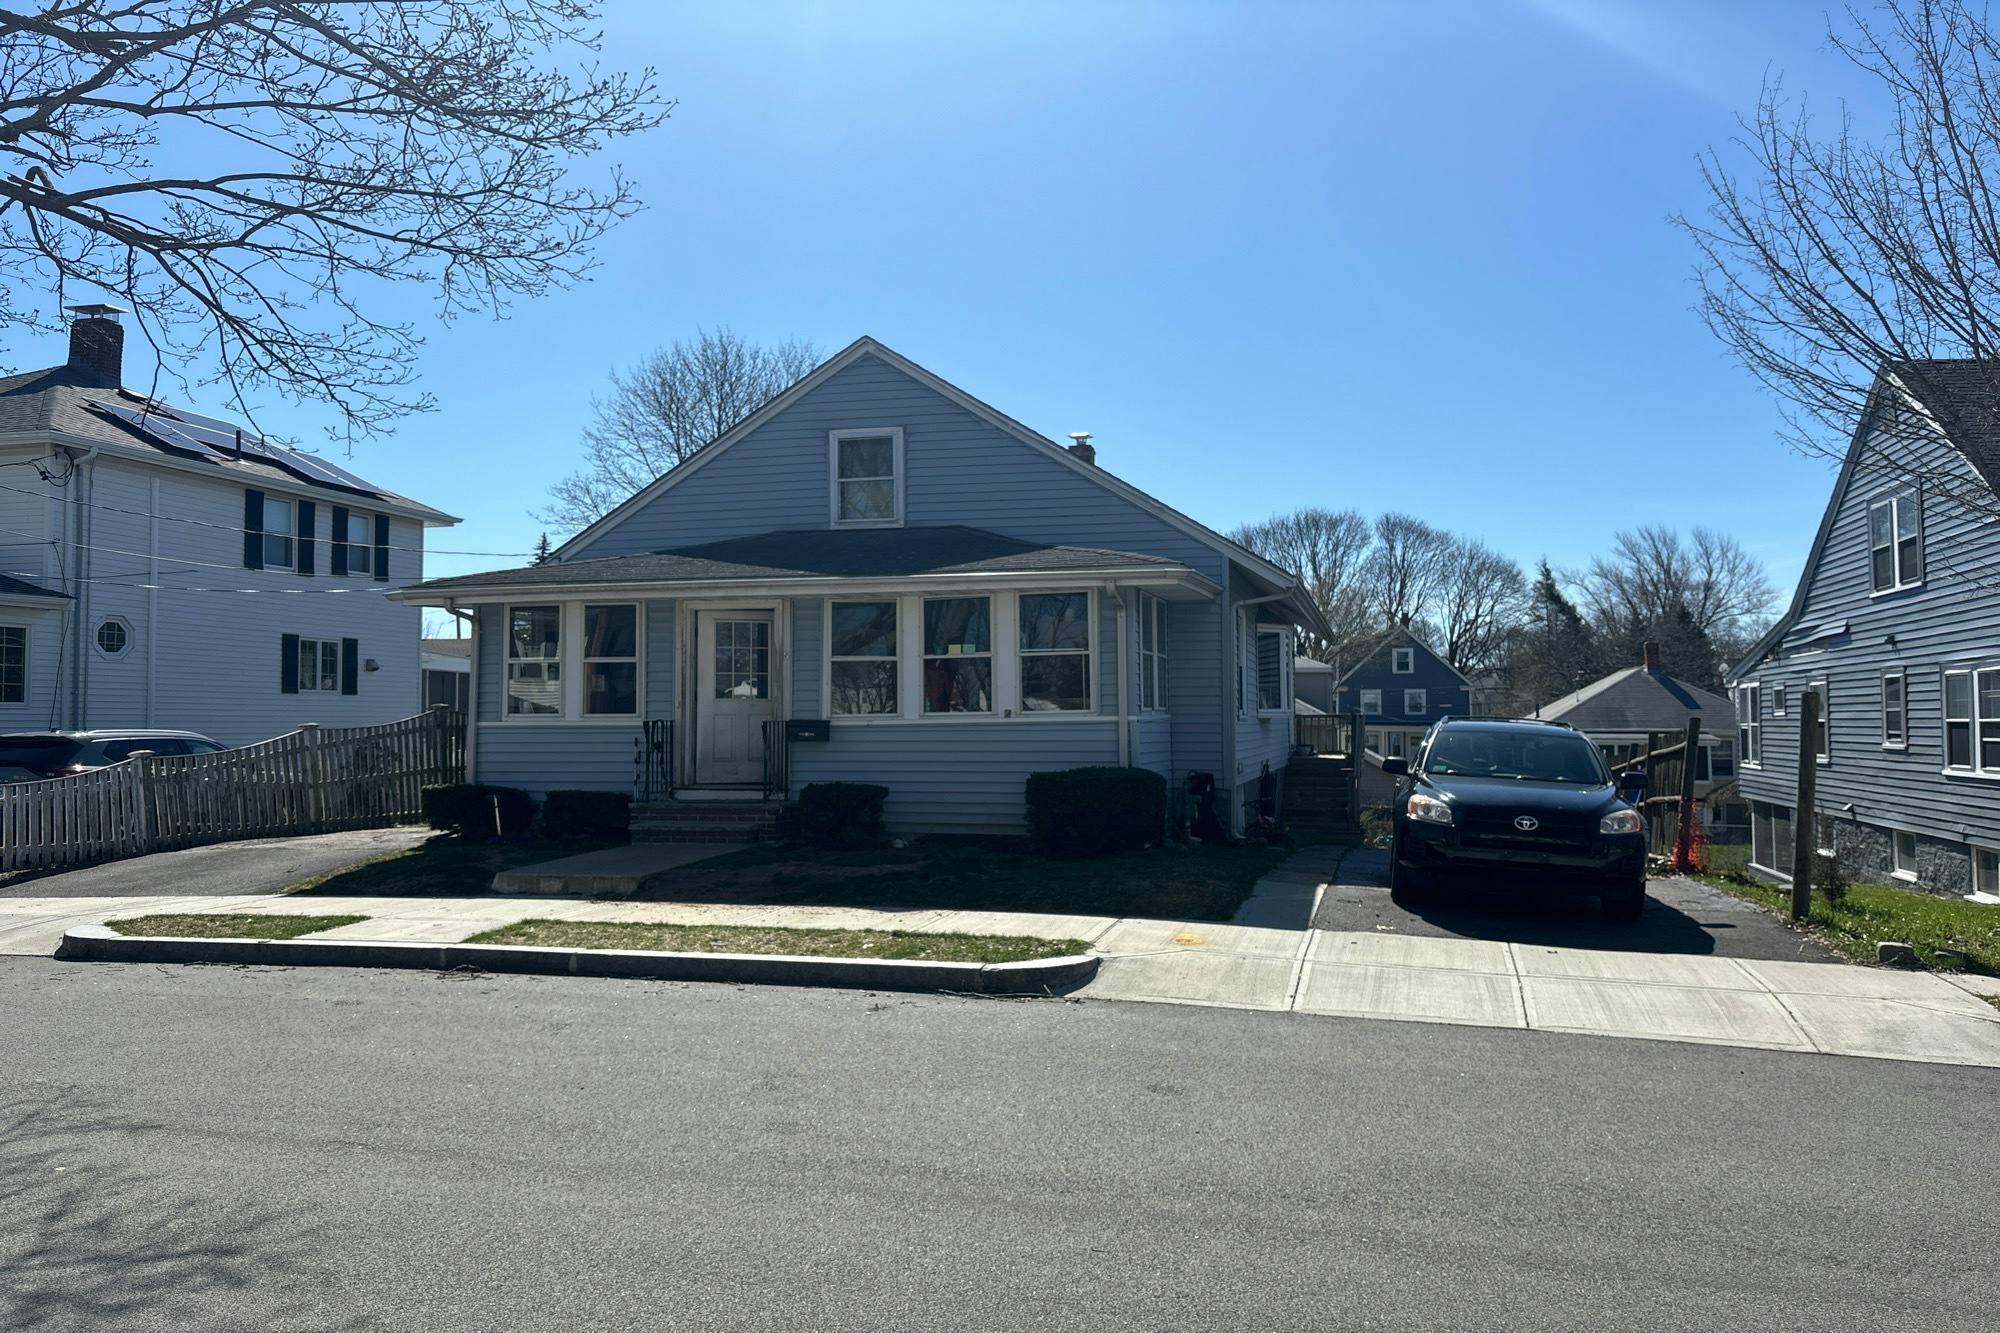 Ruthven St, Quincy, MA 02171 #1